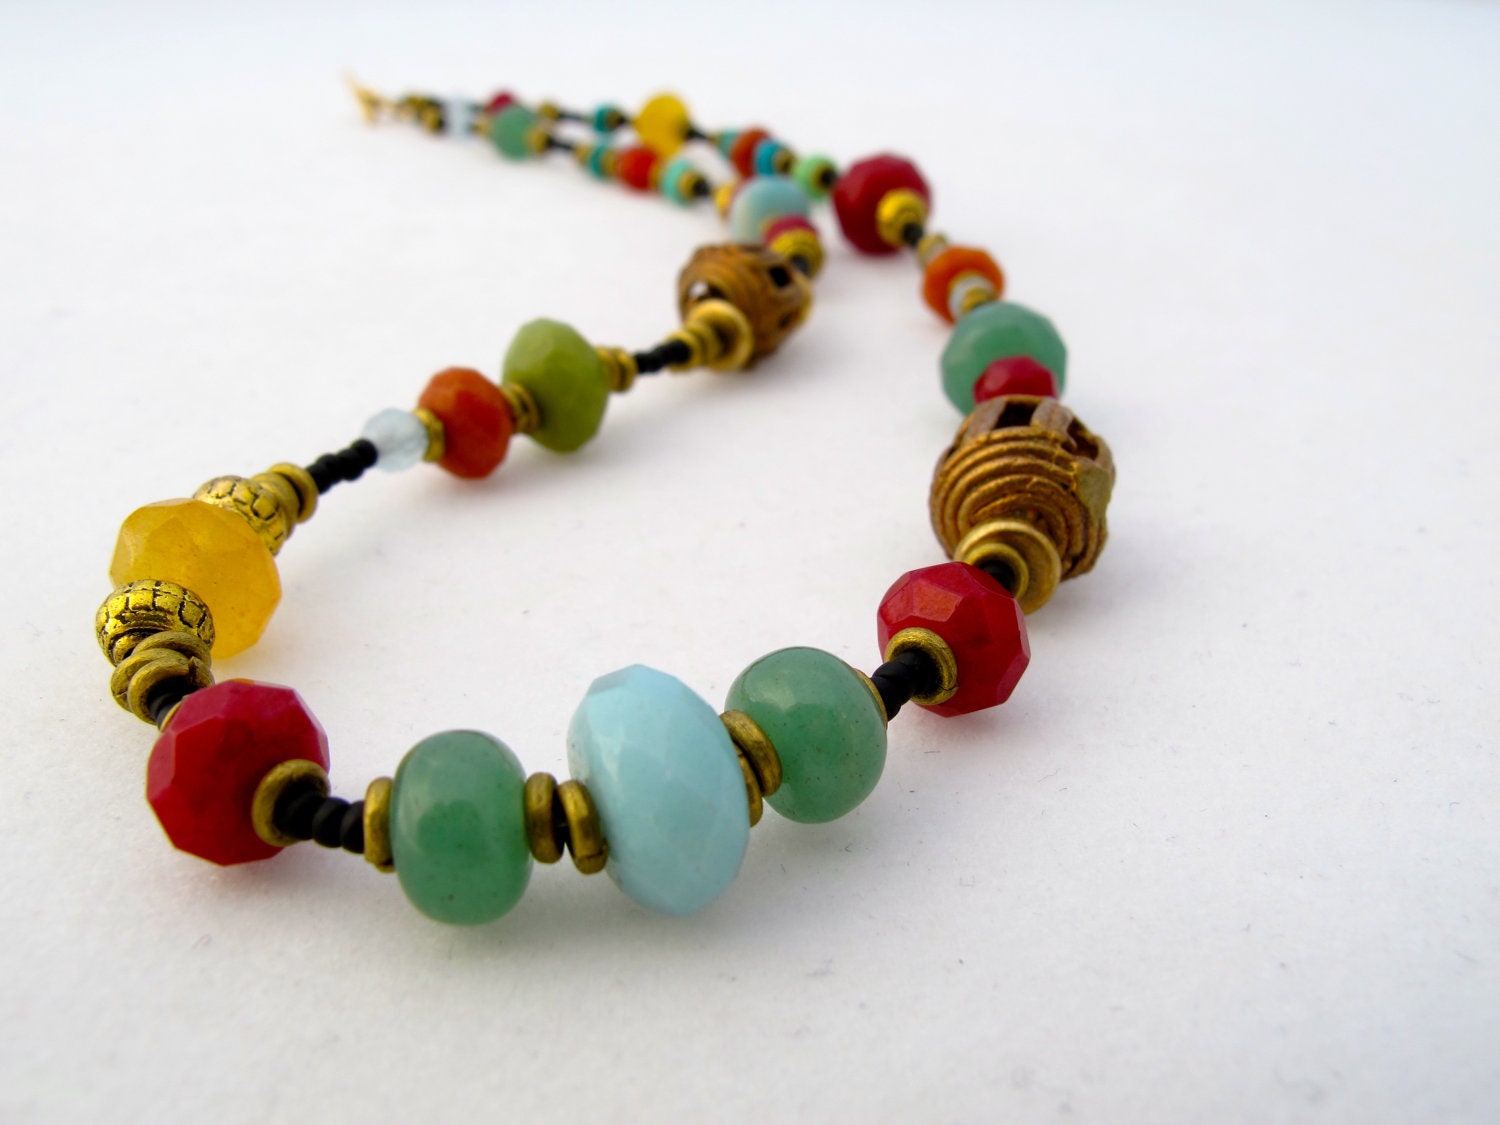 Statement Necklace - Colorful Mixed Gem